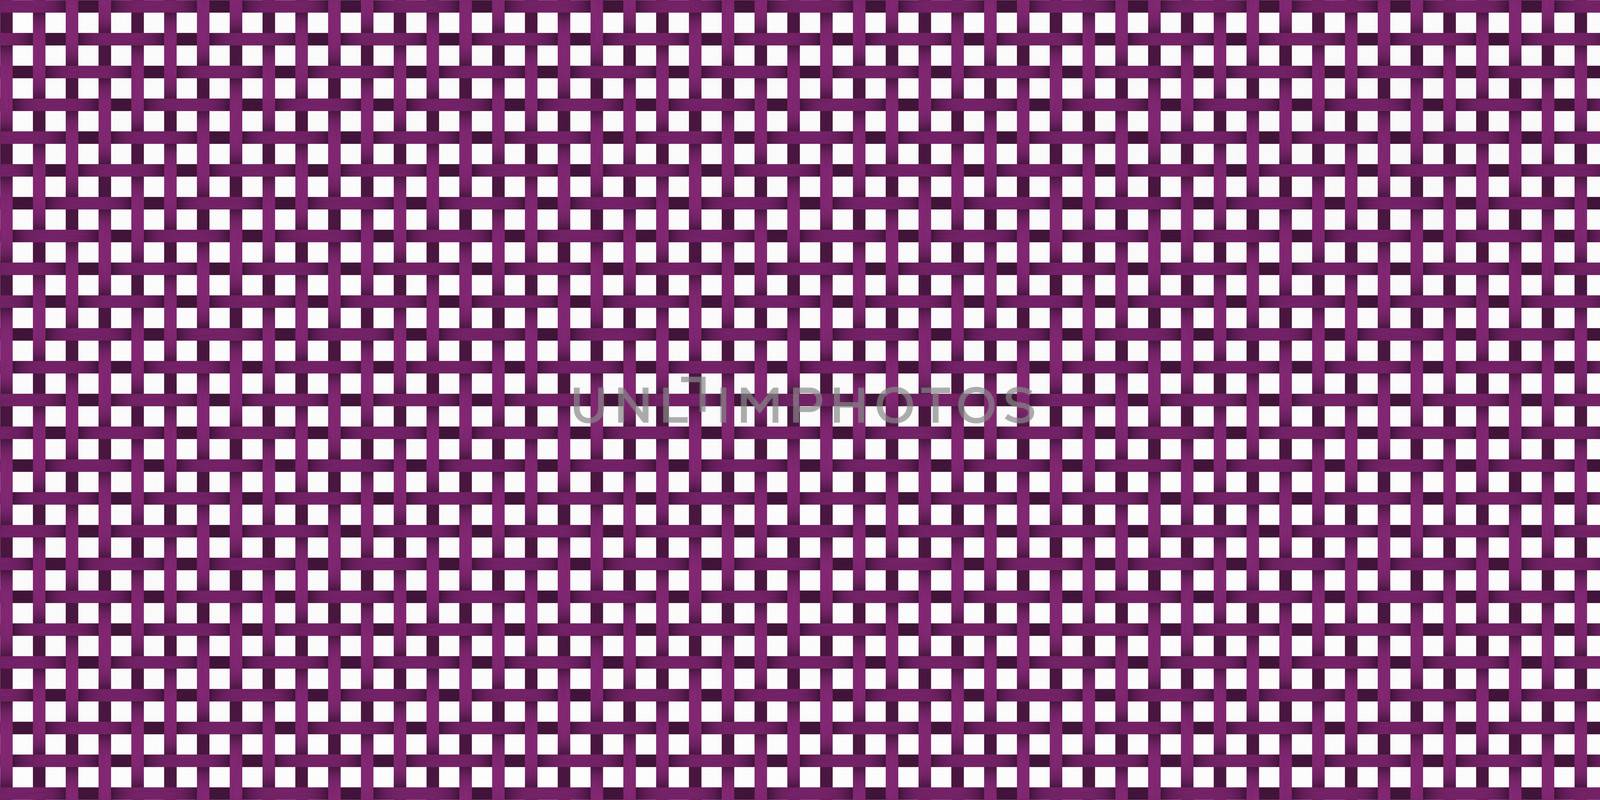 abstract background or texture pink grid color